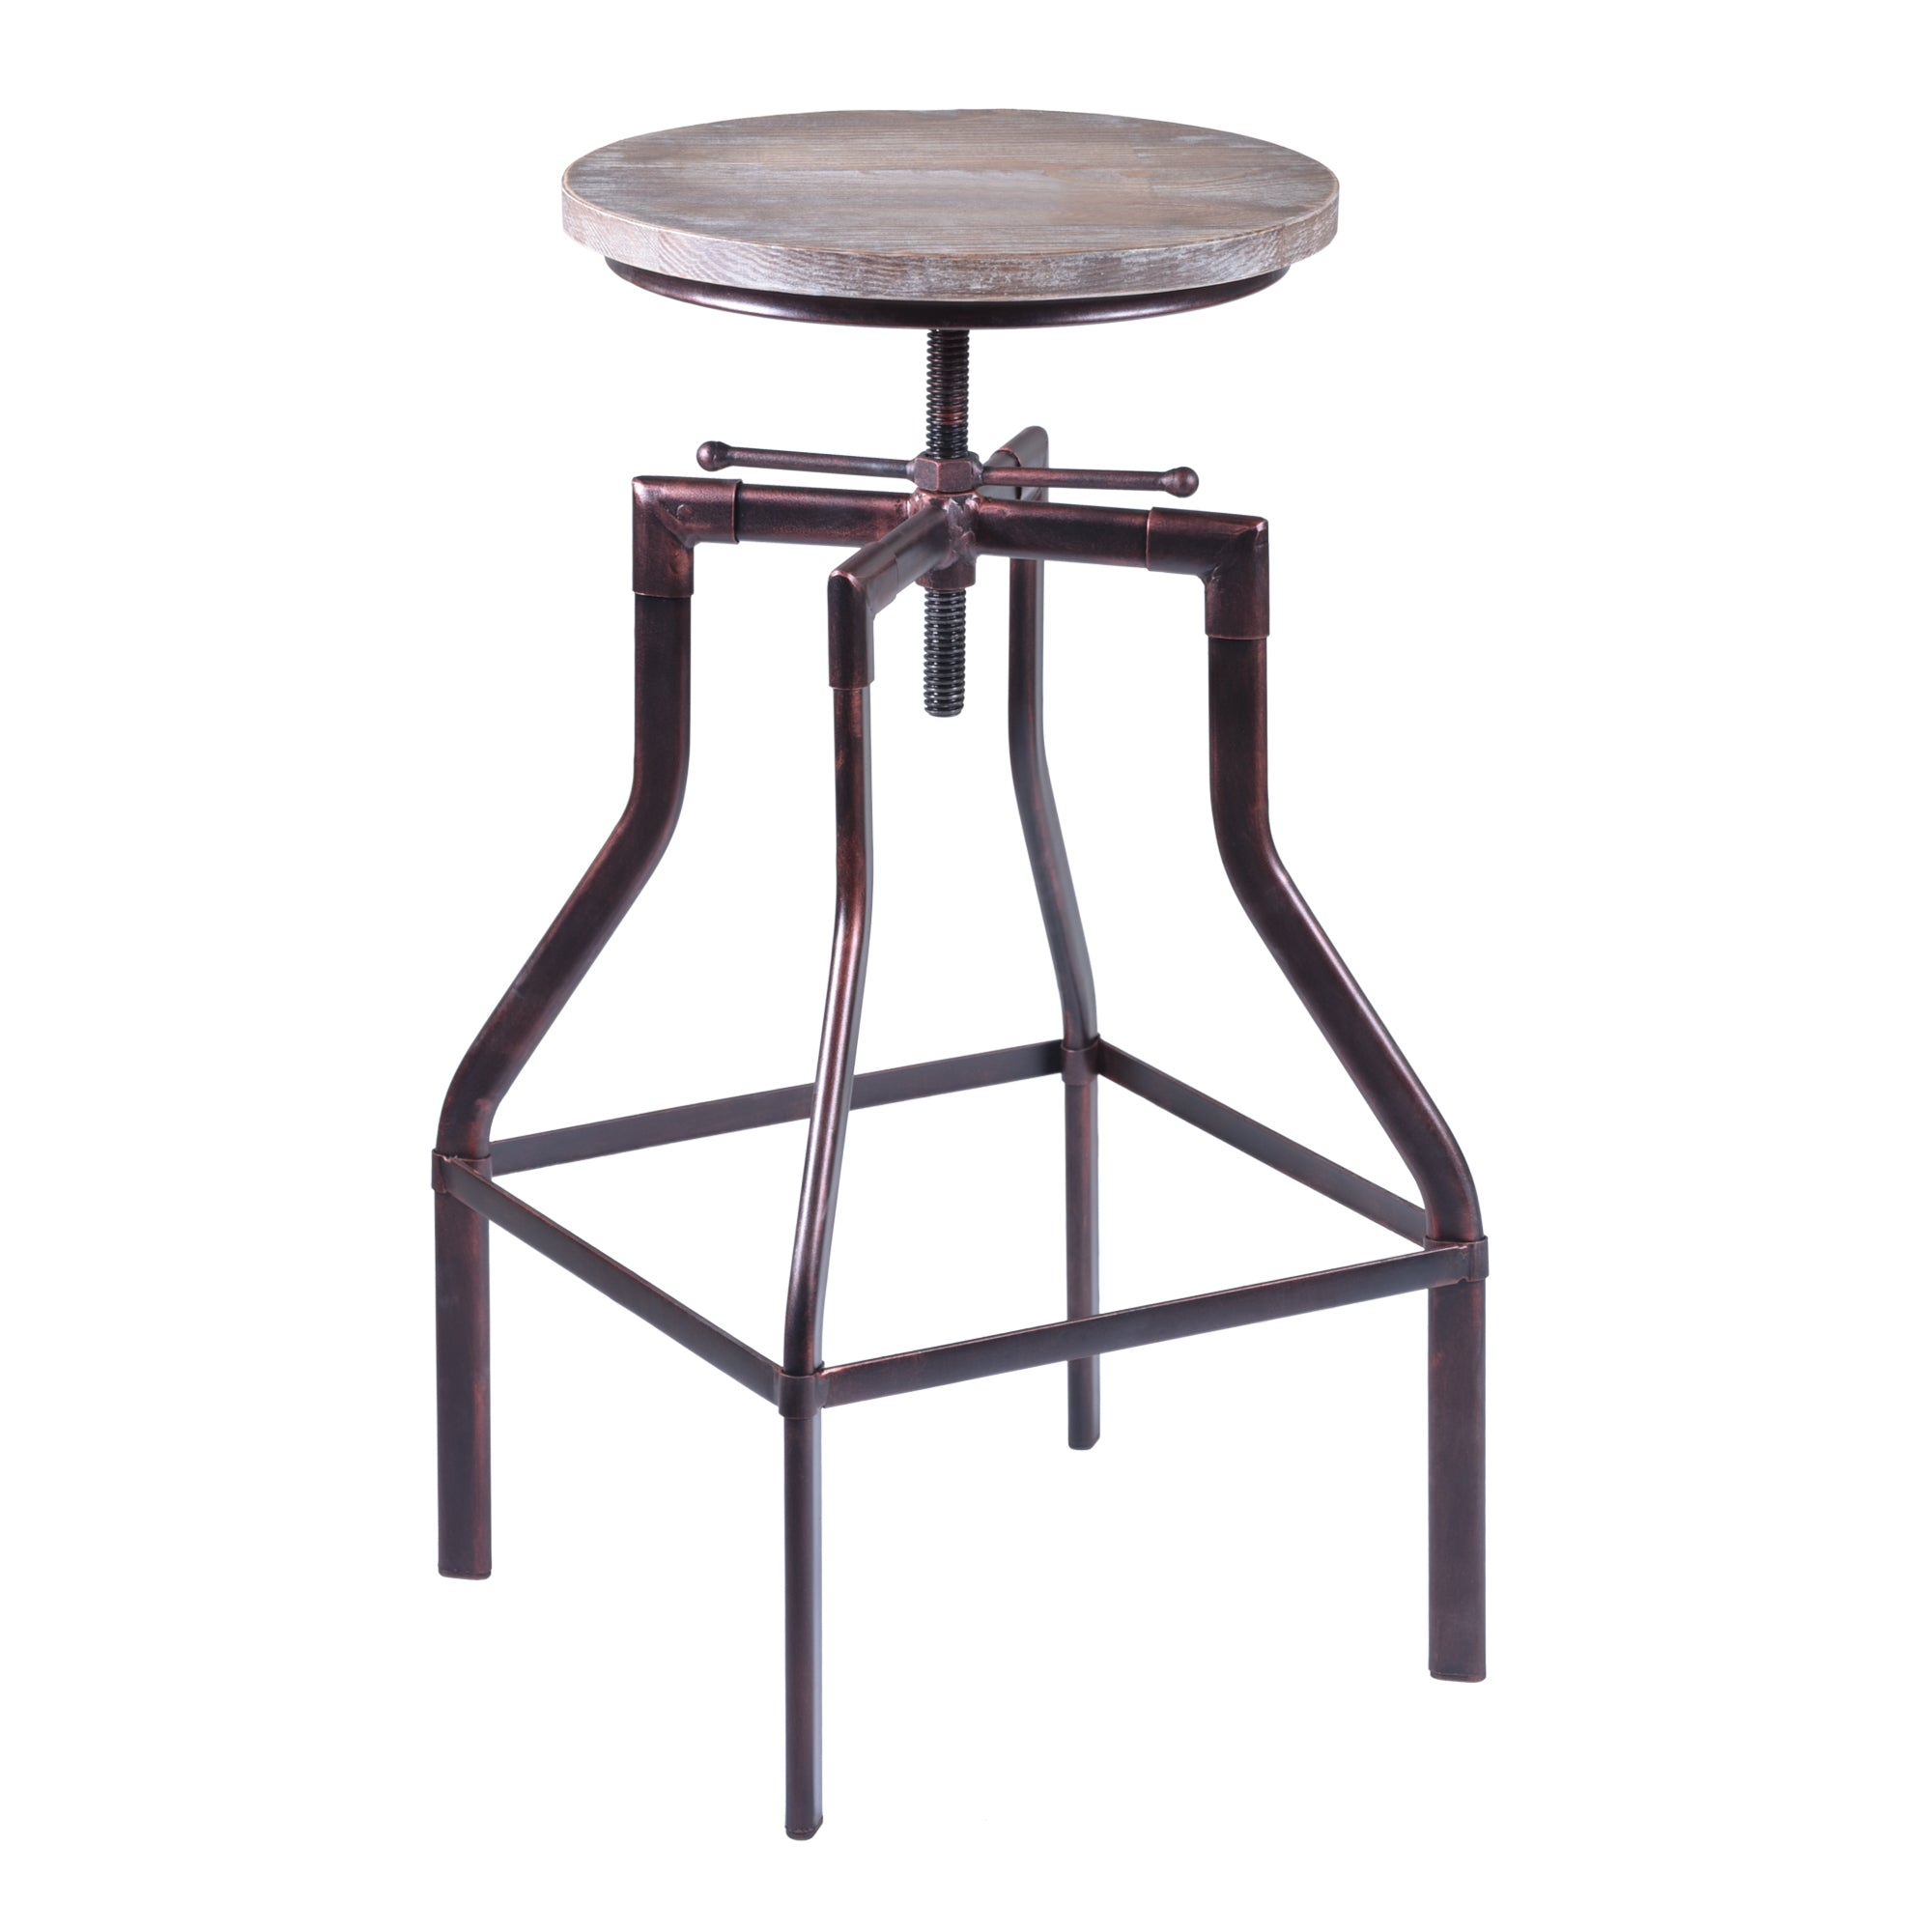 Armen Living Lccostcowo Concord Adjustable Swivel Barstool In Industrial Copper Finish With Ash Pine Wood Seat